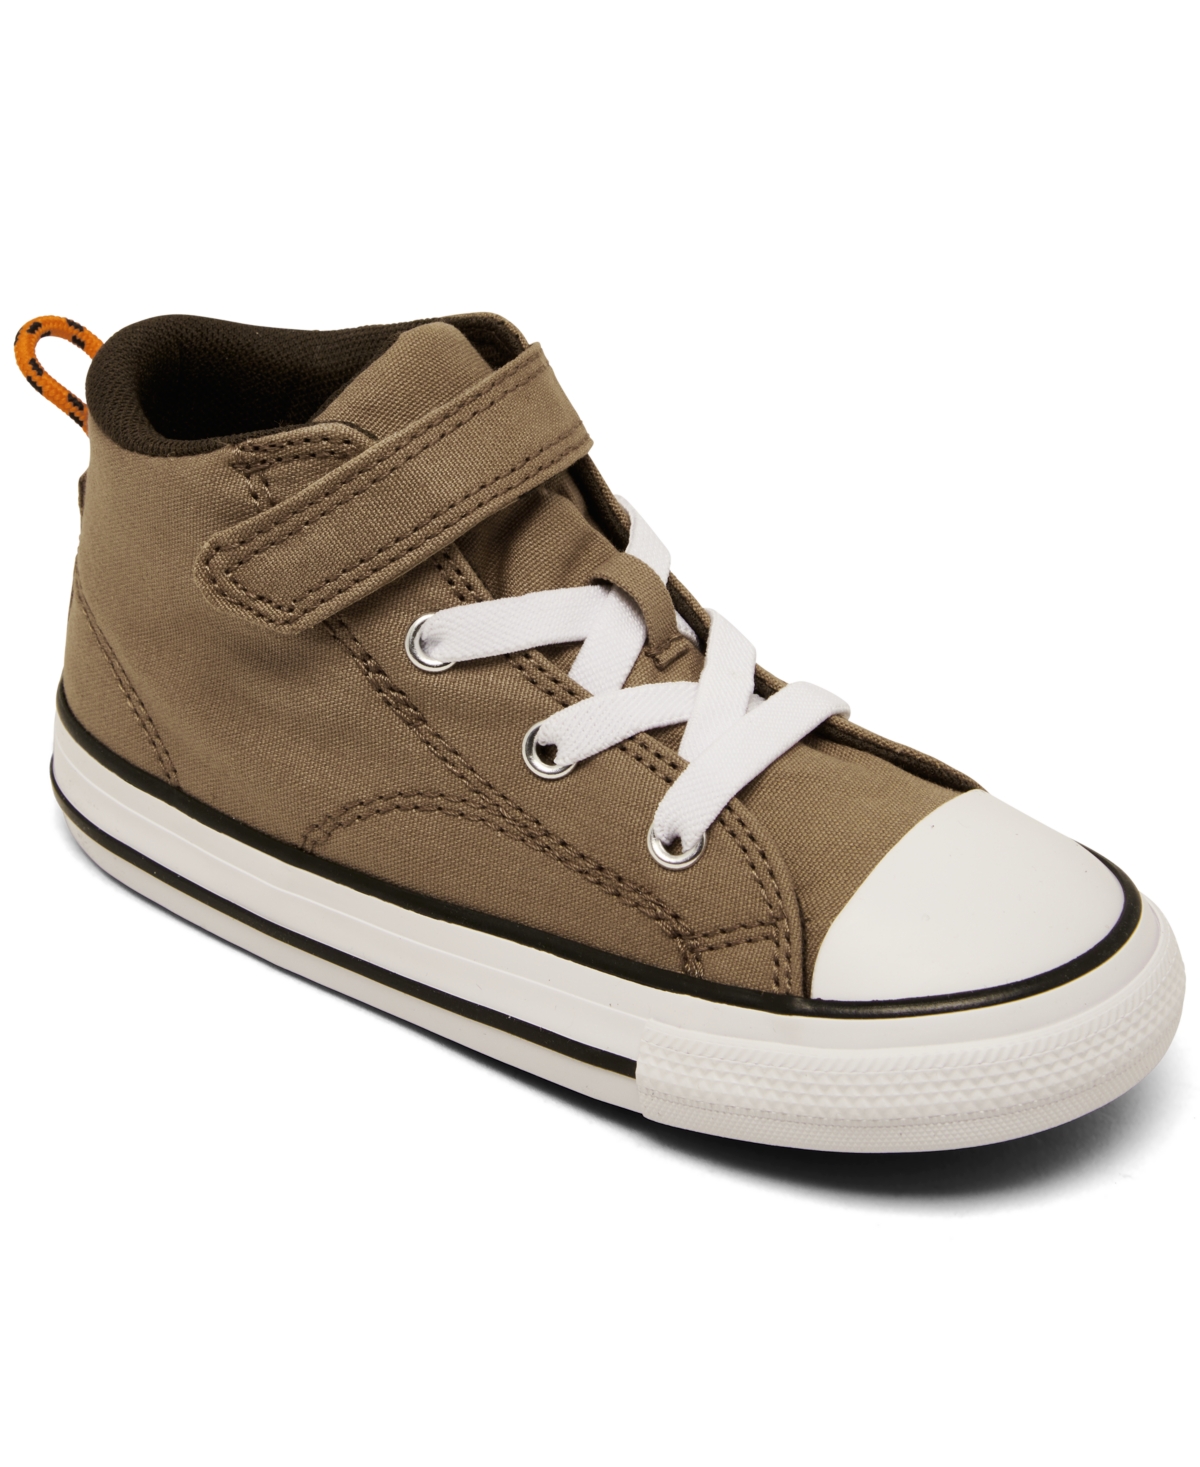 Shop Converse Toddler Kids Chuck Taylor All Star Malden Street Fastening Strap Casual Sneakers From Finish Line In Hot Tea,orange,white